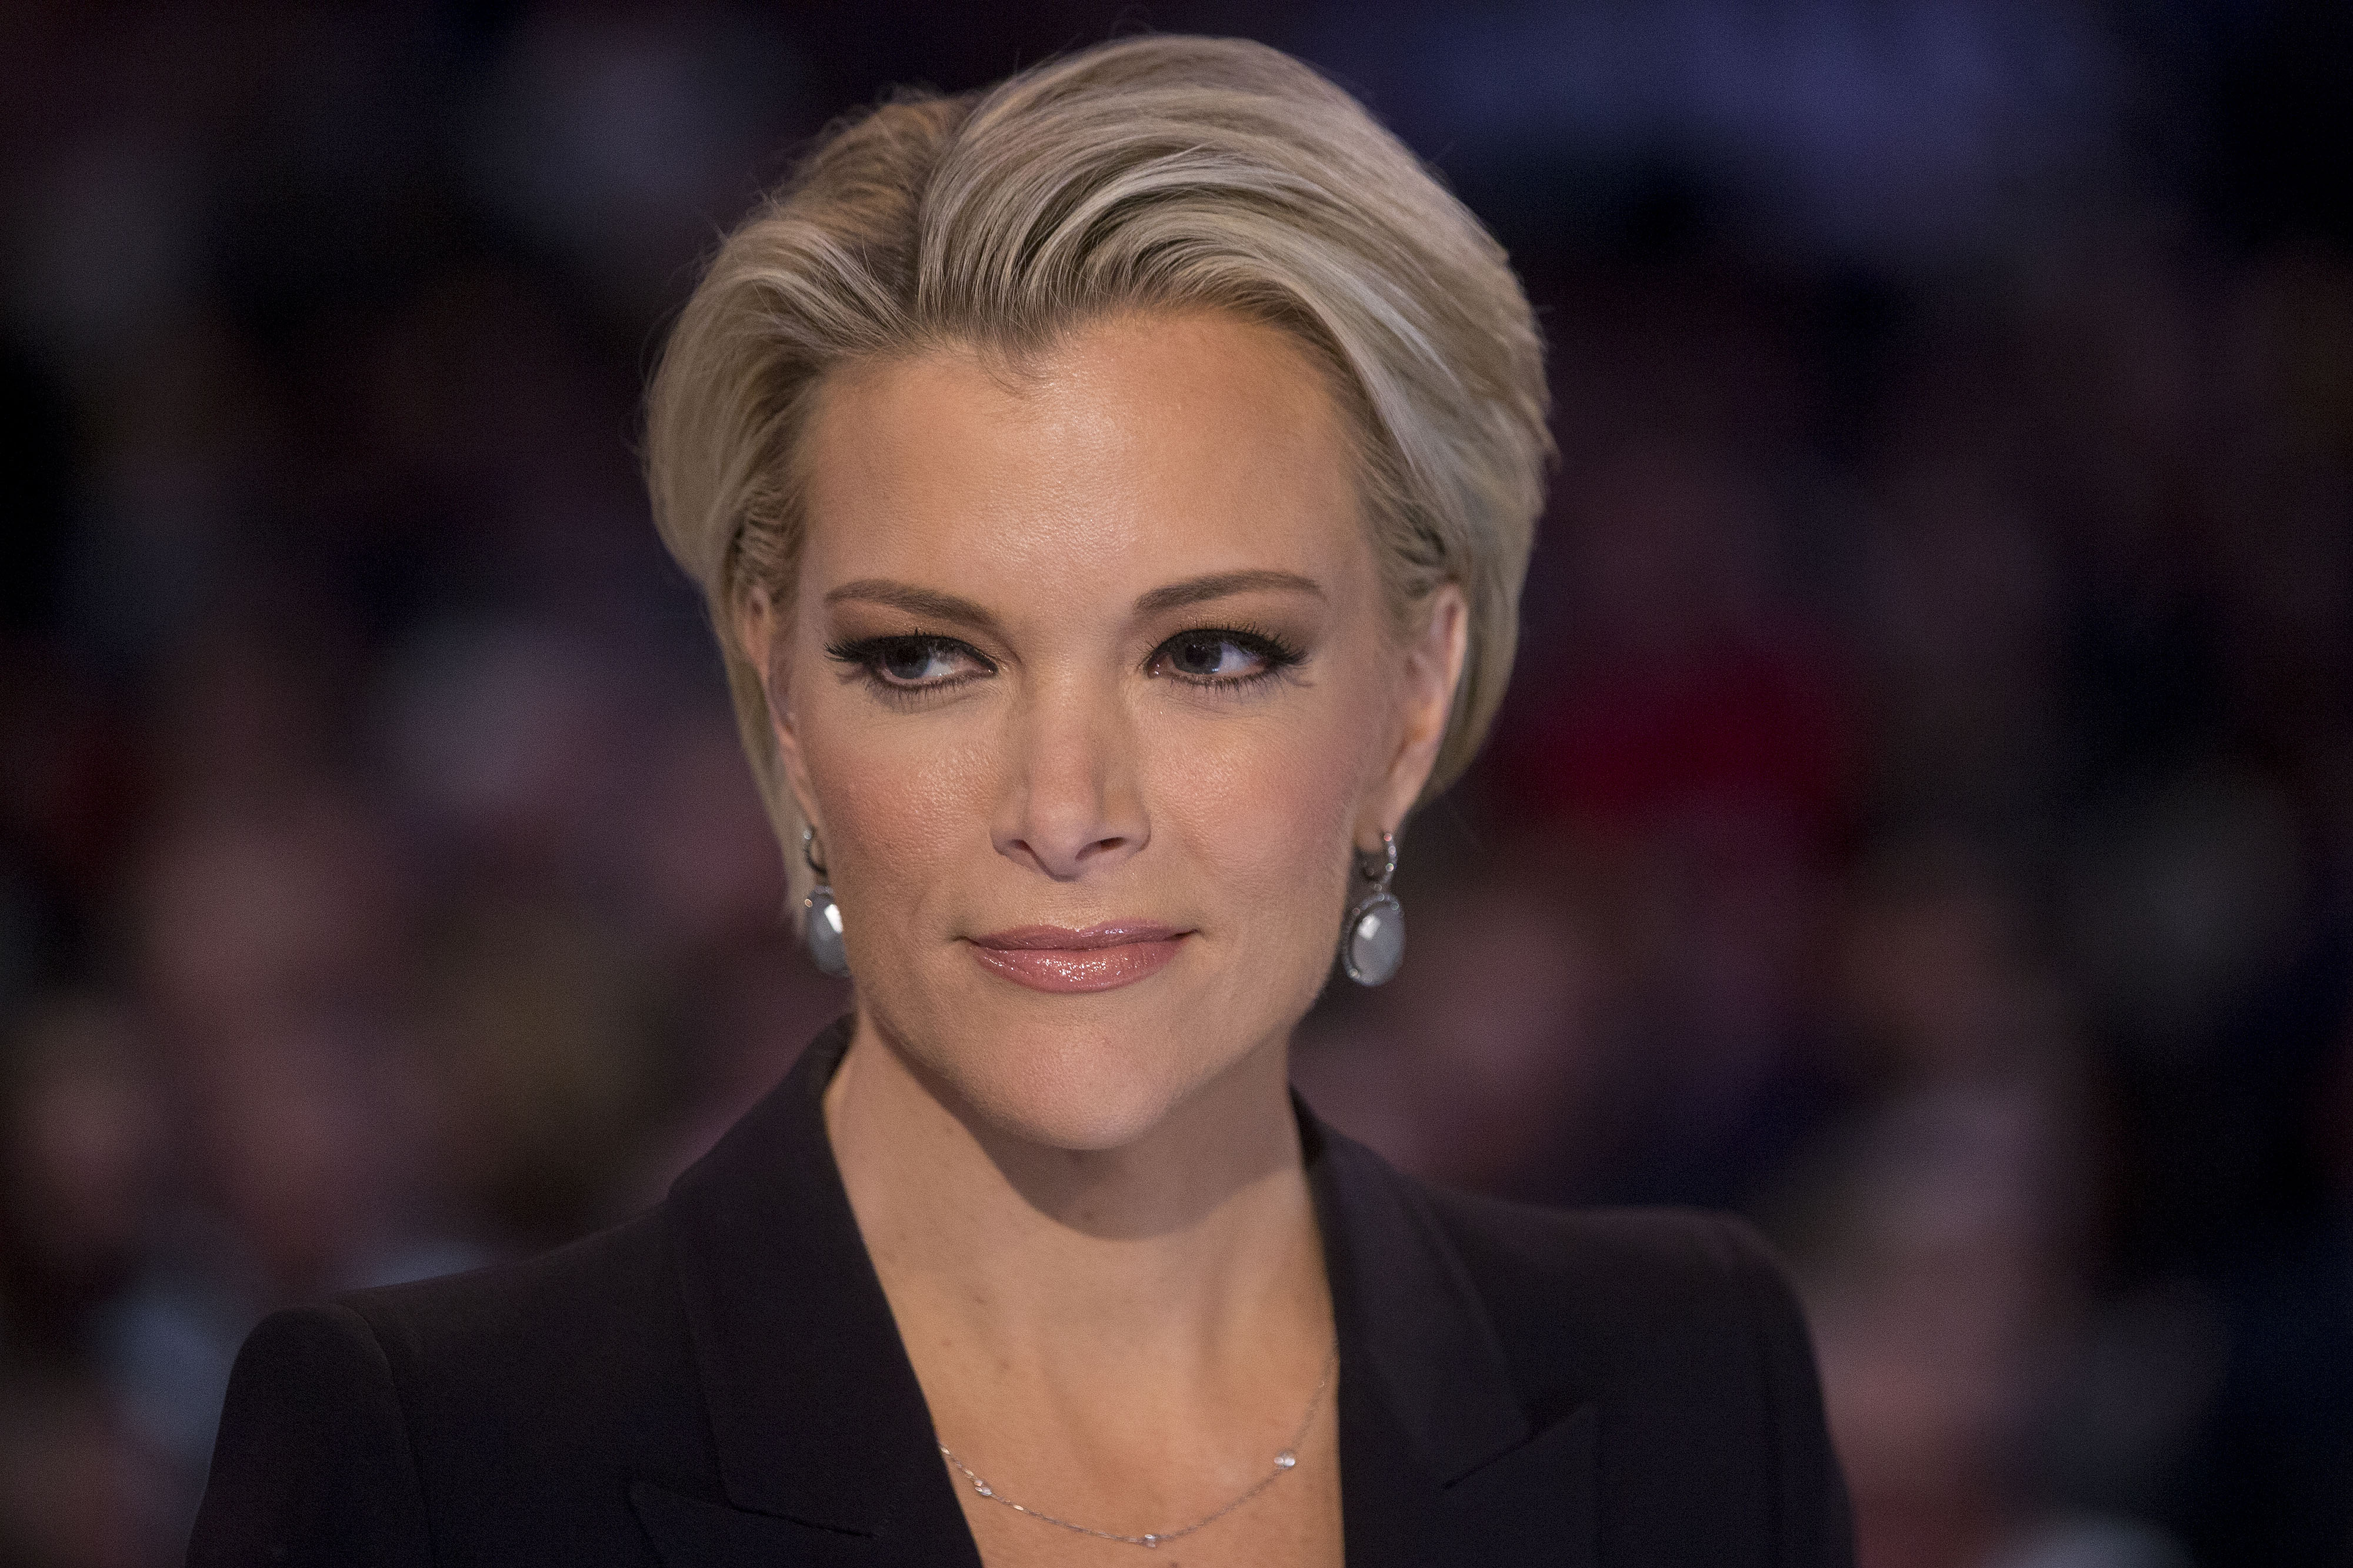 Fox News anchor Megyn Kelly waits to begin the Republican presidential candidate debate at the Iowa Events Center in Des Moines, Iowa, U.S., on Thursday, Jan. 28, 2016. (Andrew Harrer&mdash;Bloomberg/Getty Images)